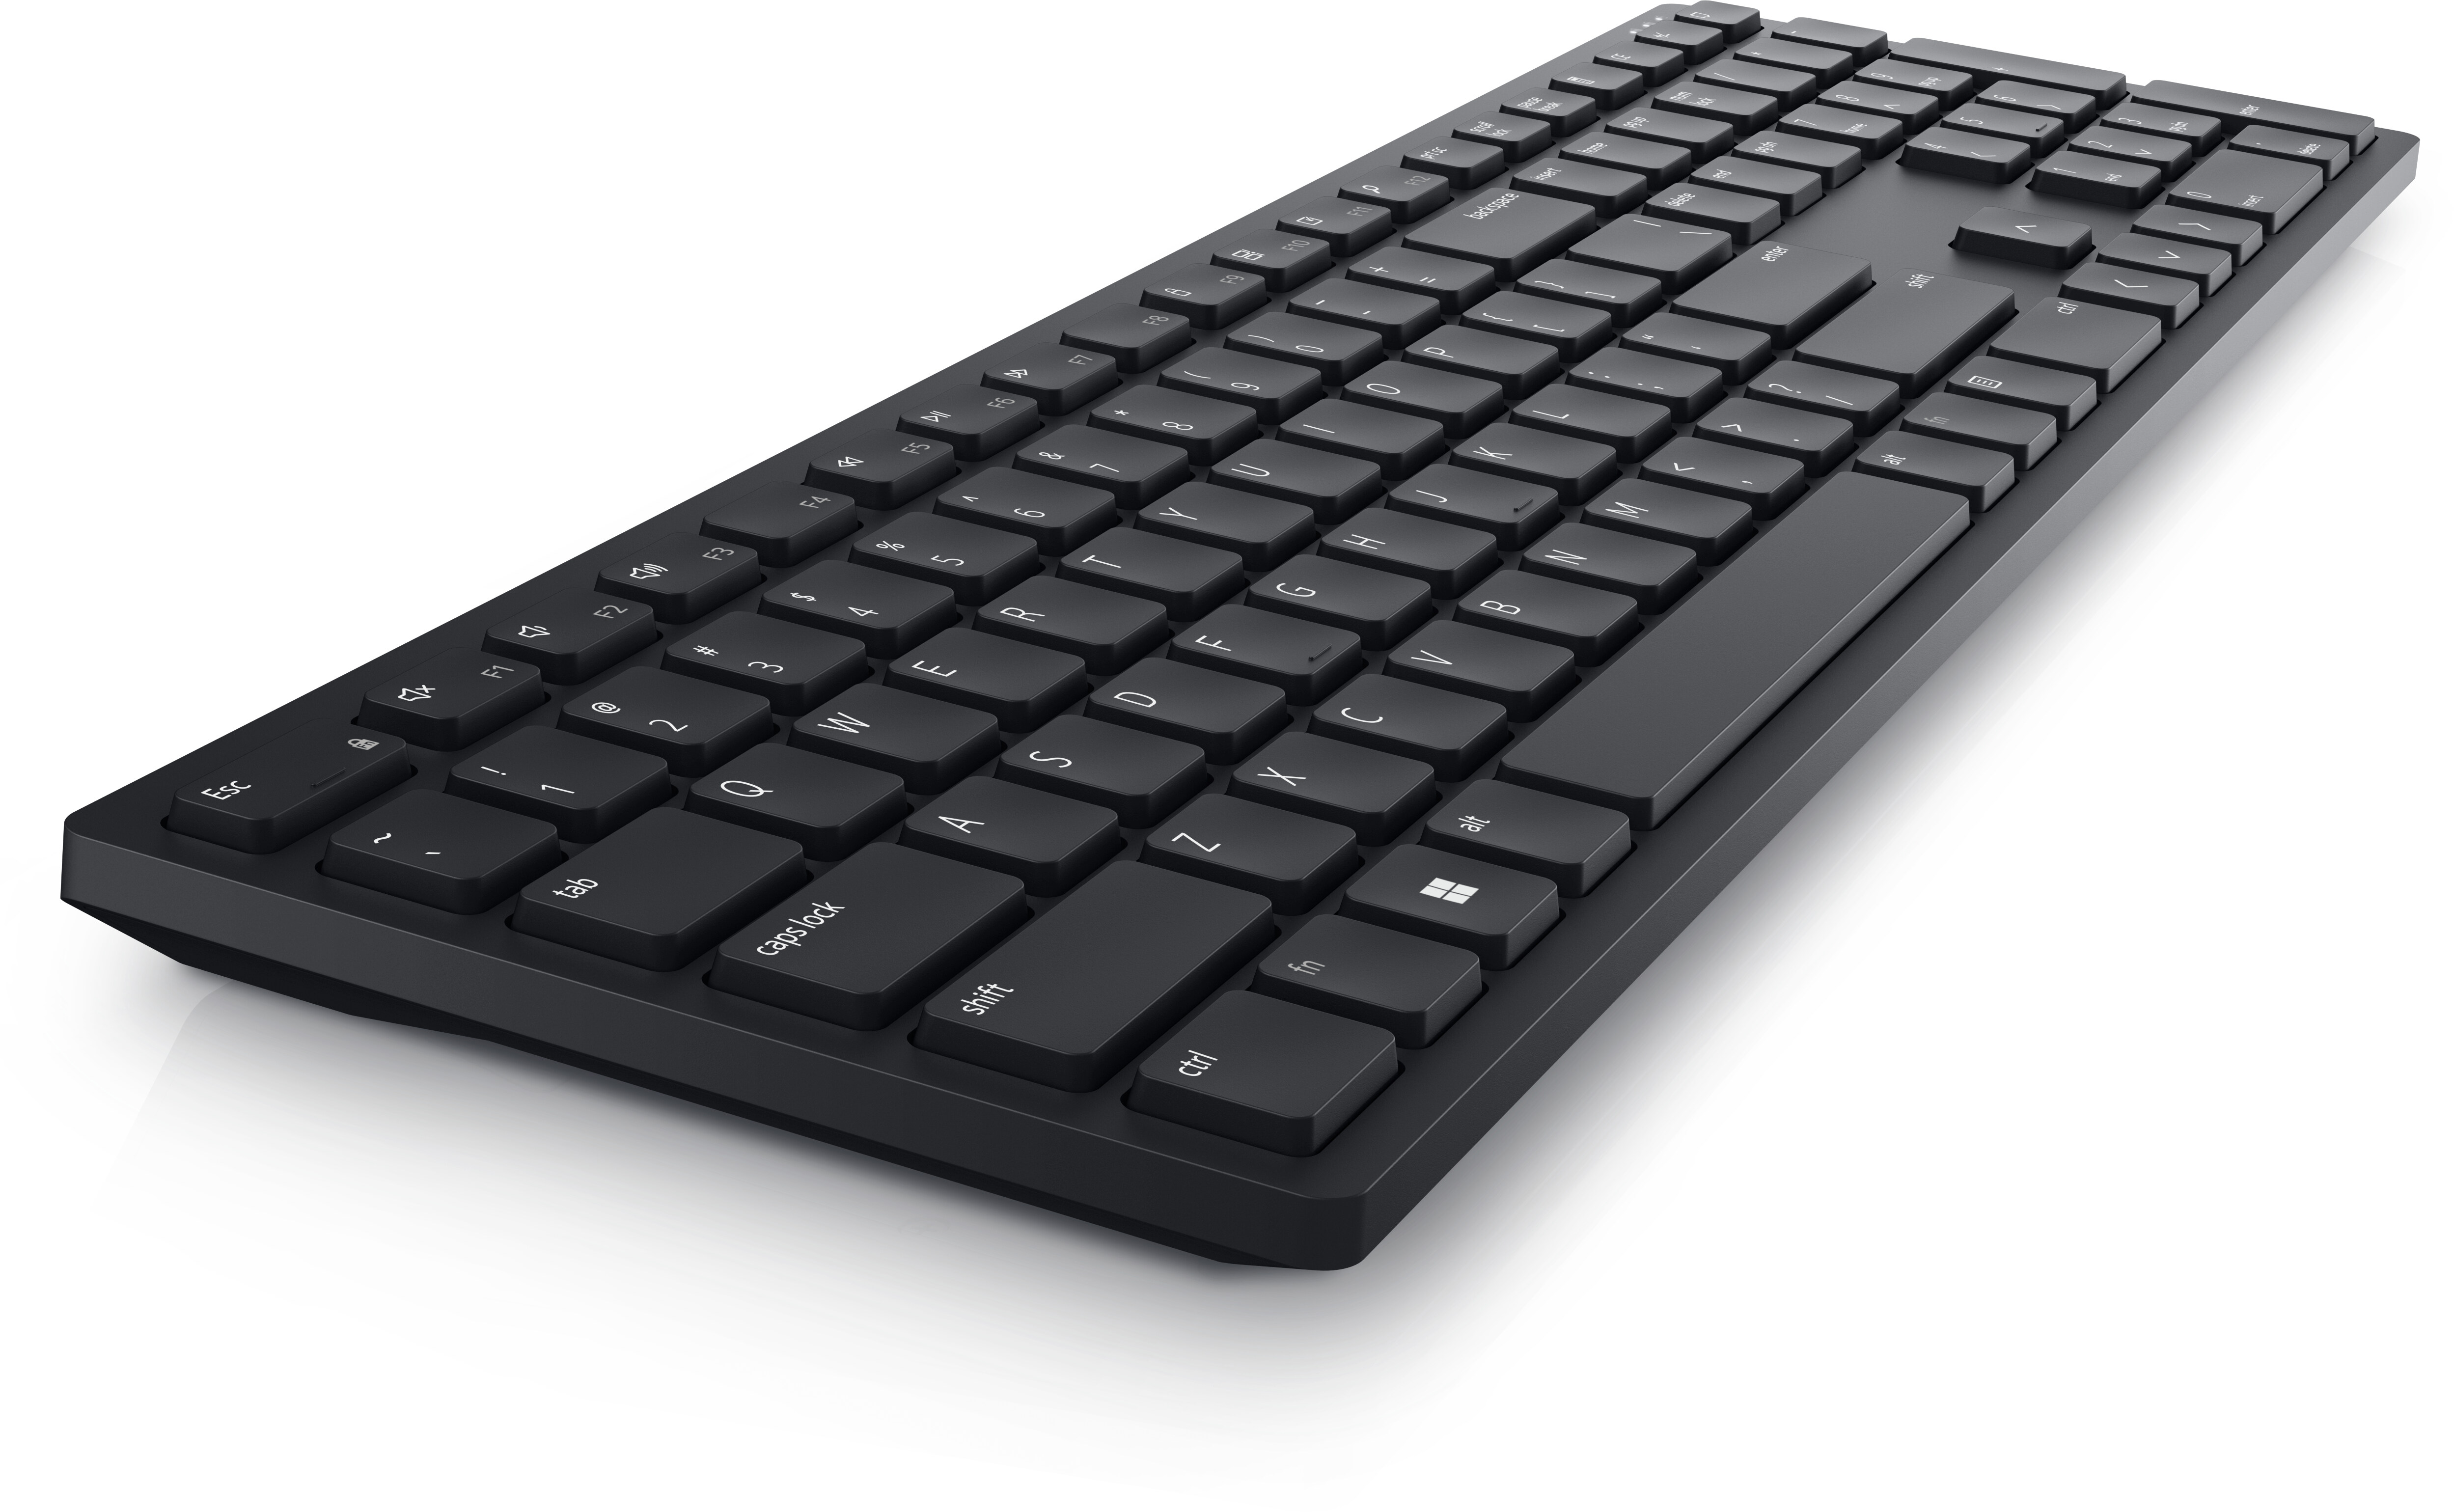 Protection clavier – Fit Super-Humain